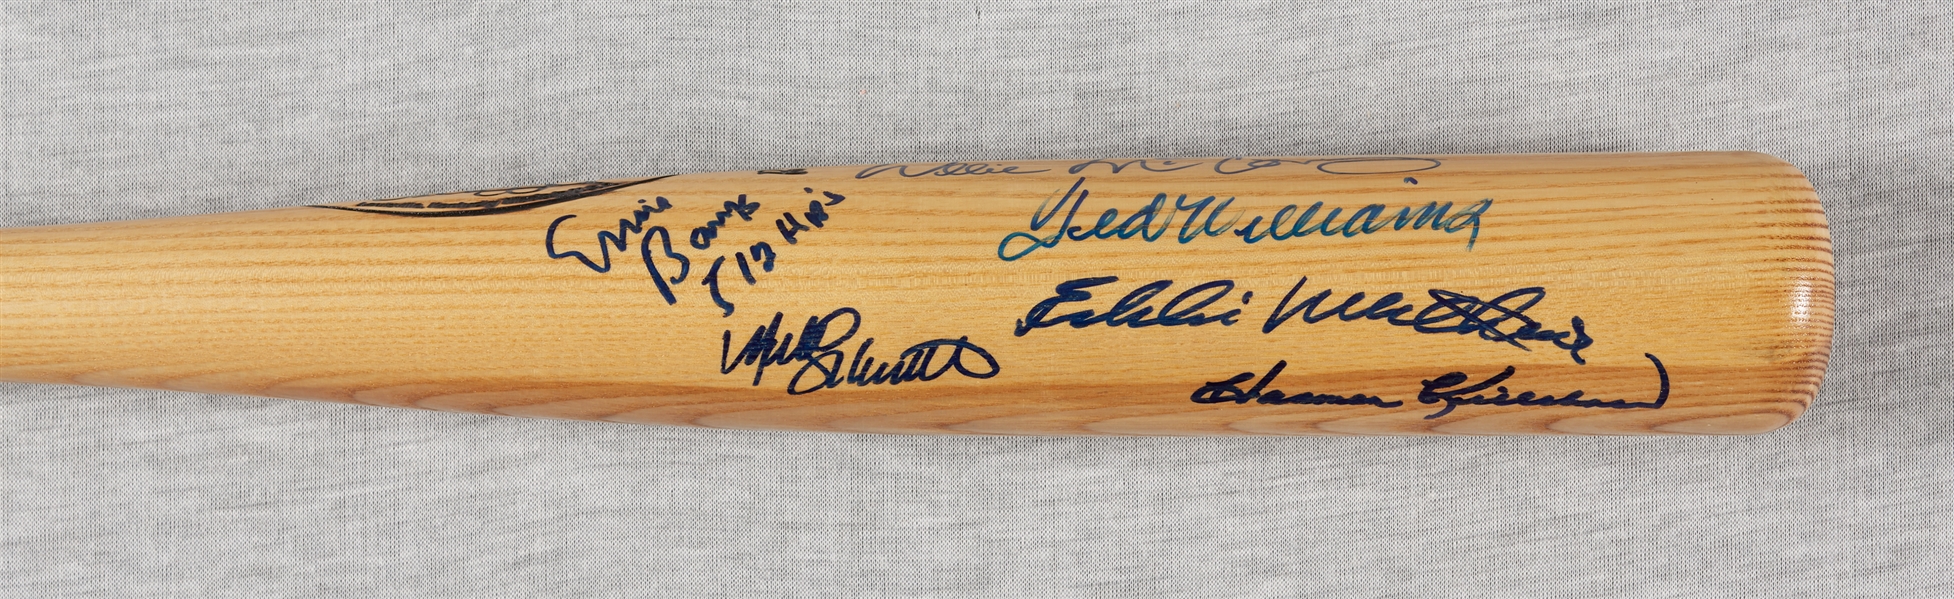 500 Home Run Club Multi-Signed LS The Kid Bat with Williams, Aaron, Mays (11) (BAS)